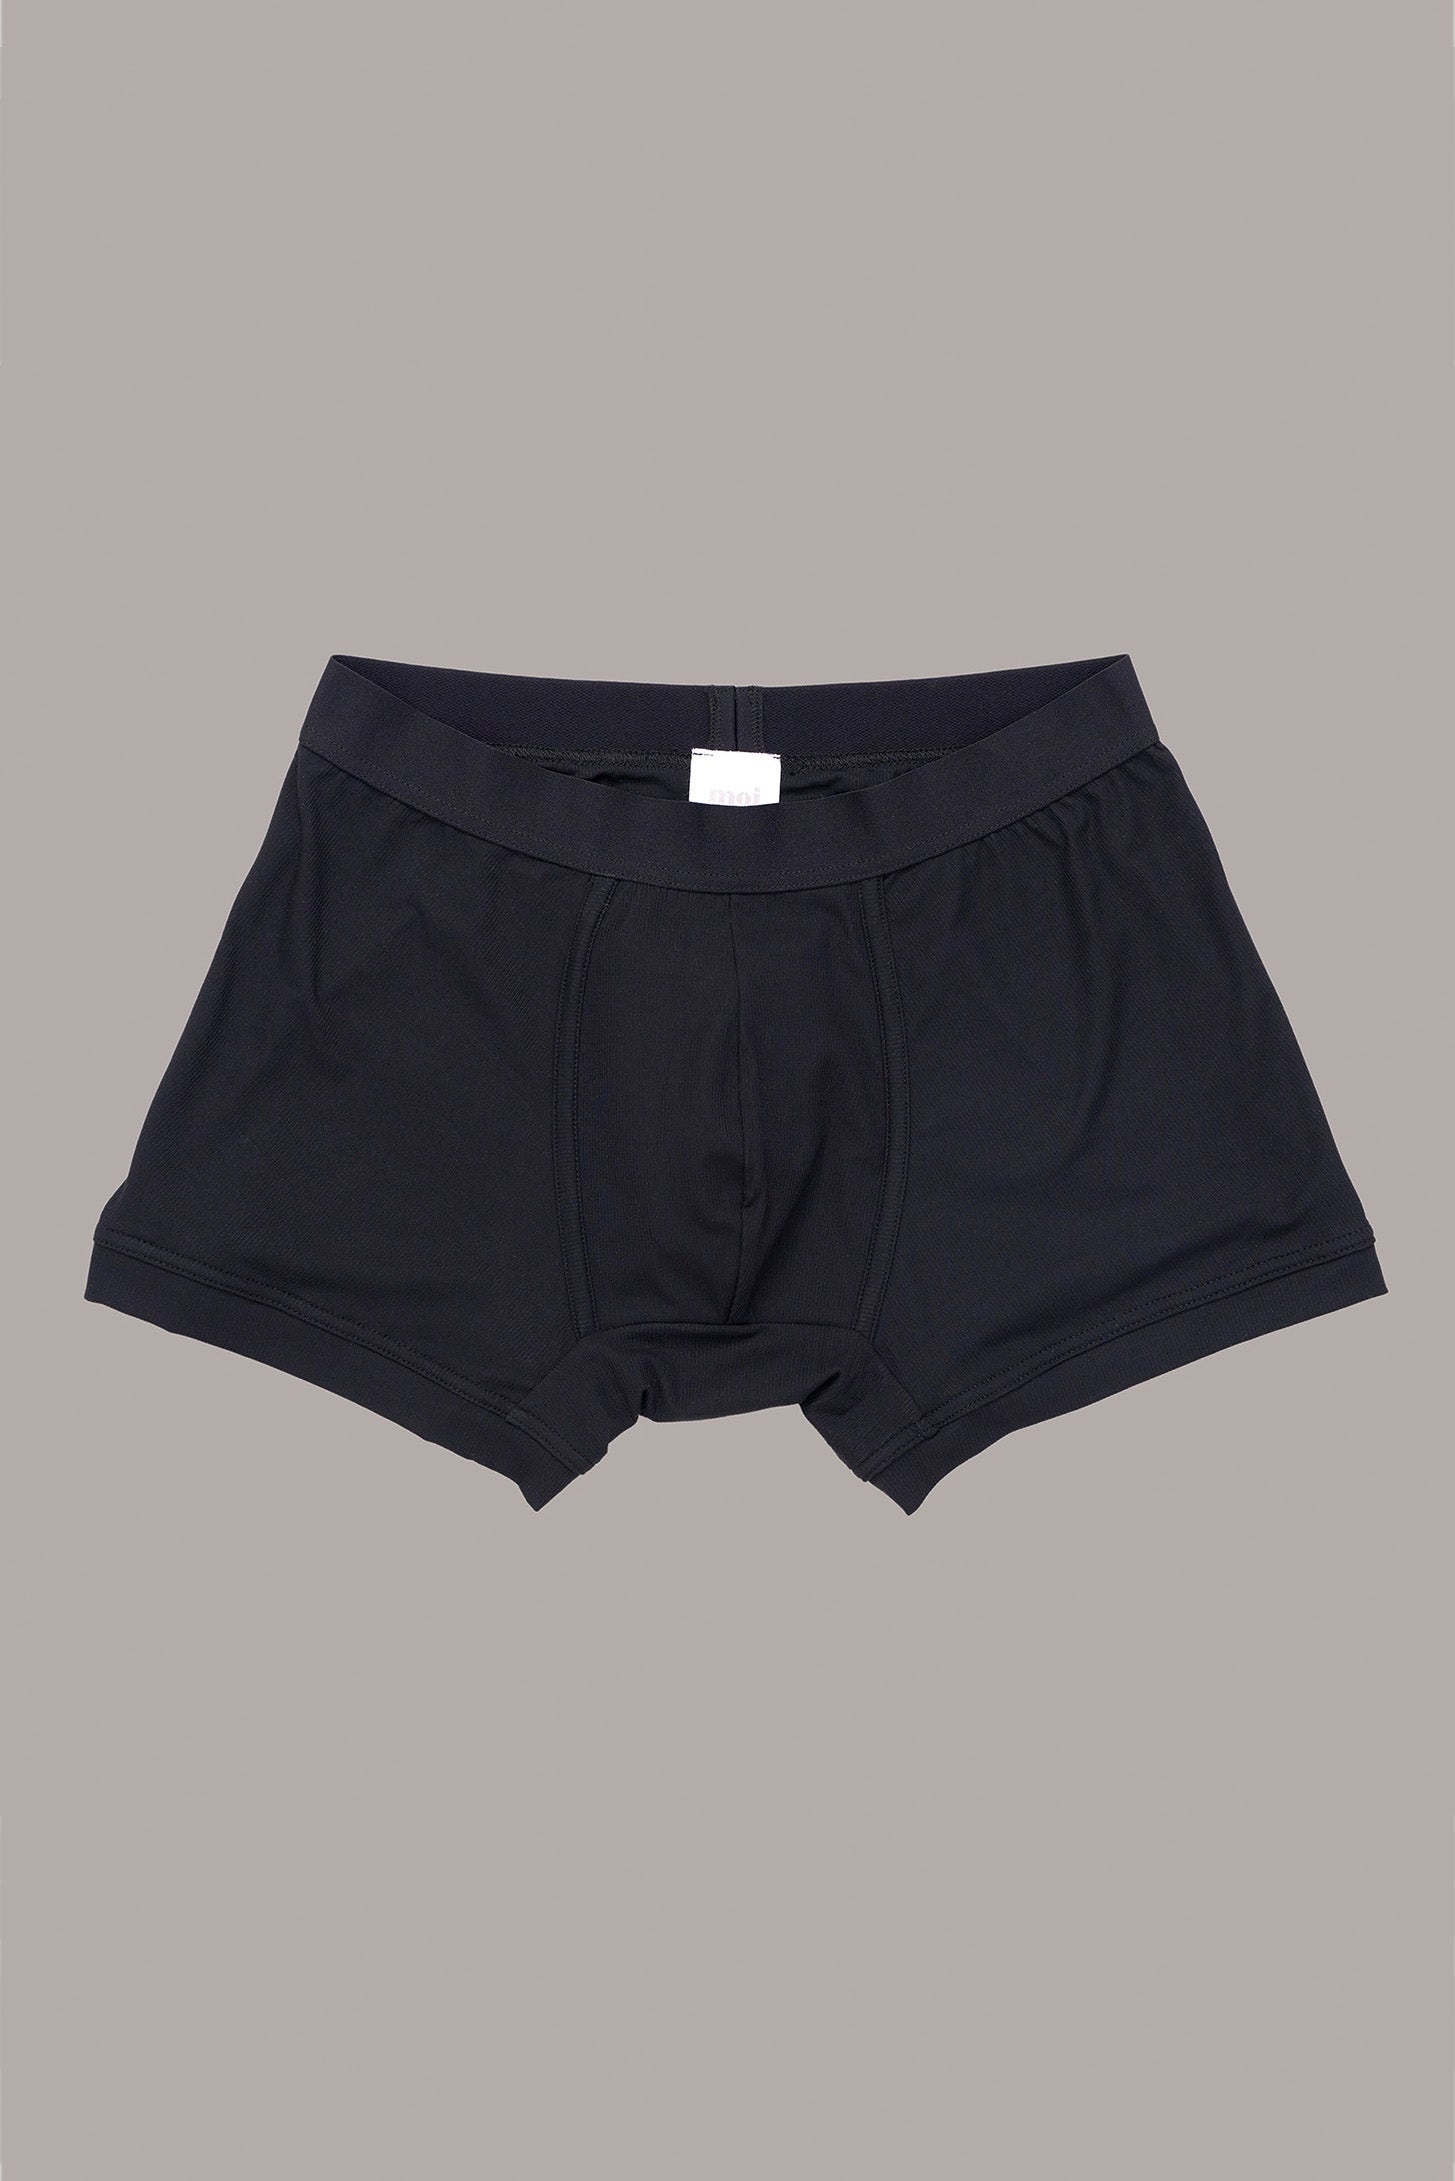 Boxer briefs / underpants with a new waistband in black made from natural MicroModal from moi-basics